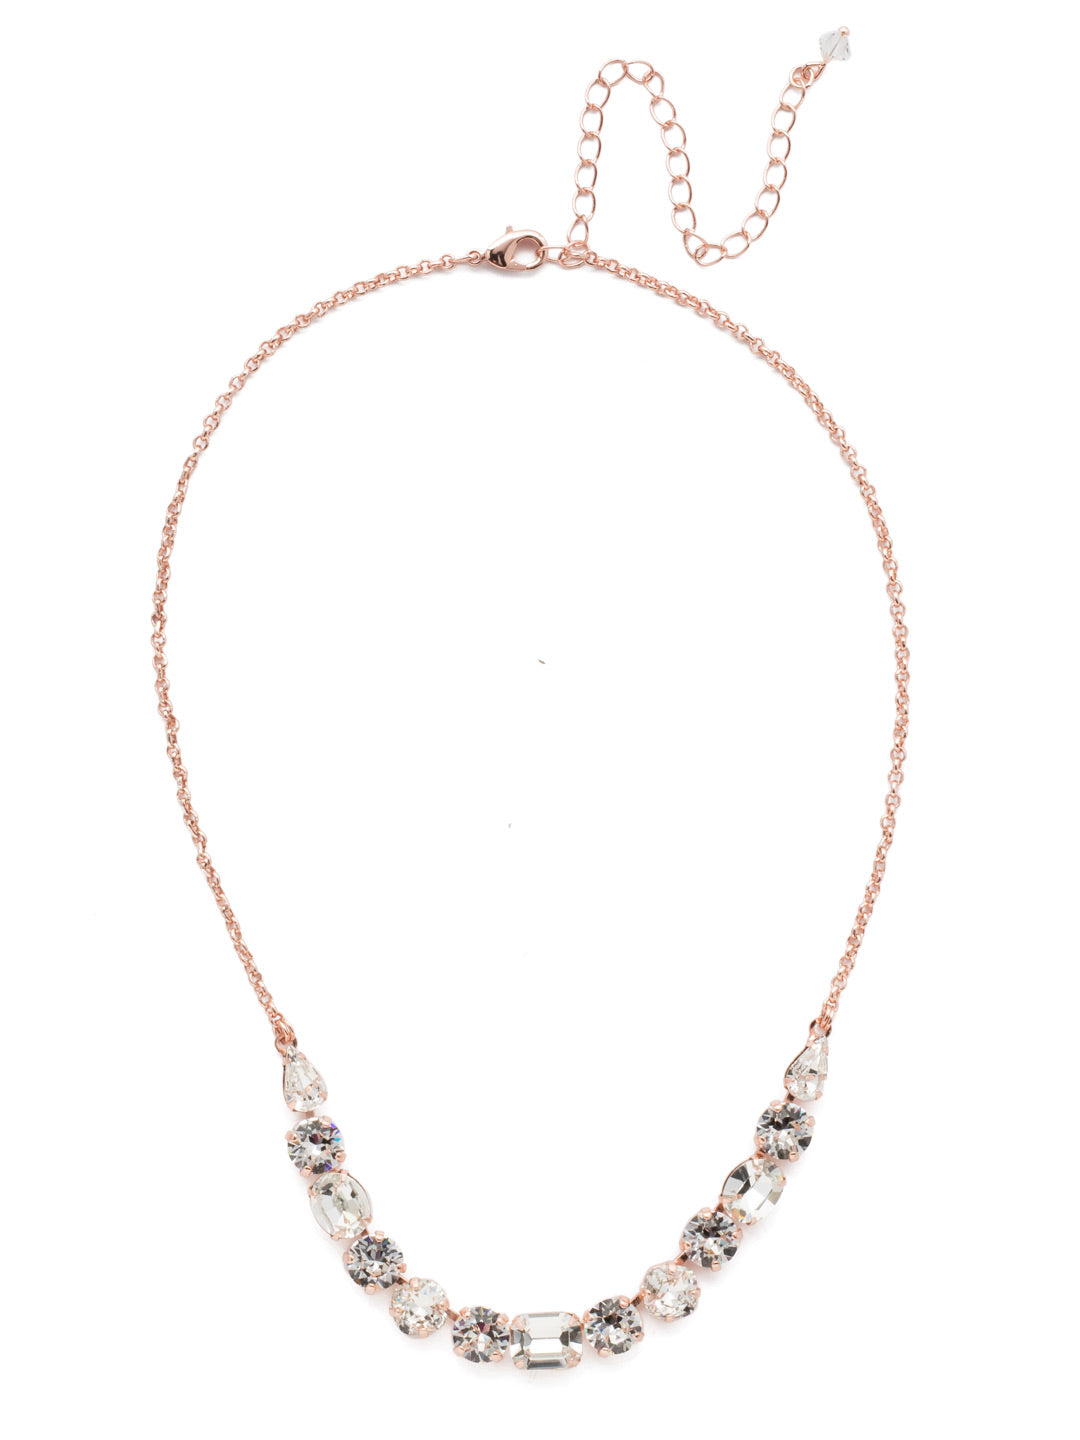 Tansy Half Line Tennis Necklace - NDQ14RGCRY - <p>Oval, round, emerald, pear and cushion cut crystals are accented by a delicate chain for subtle sparkle that looks great layered or worn solo. From Sorrelli's Crystal collection in our Rose Gold-tone finish.</p>